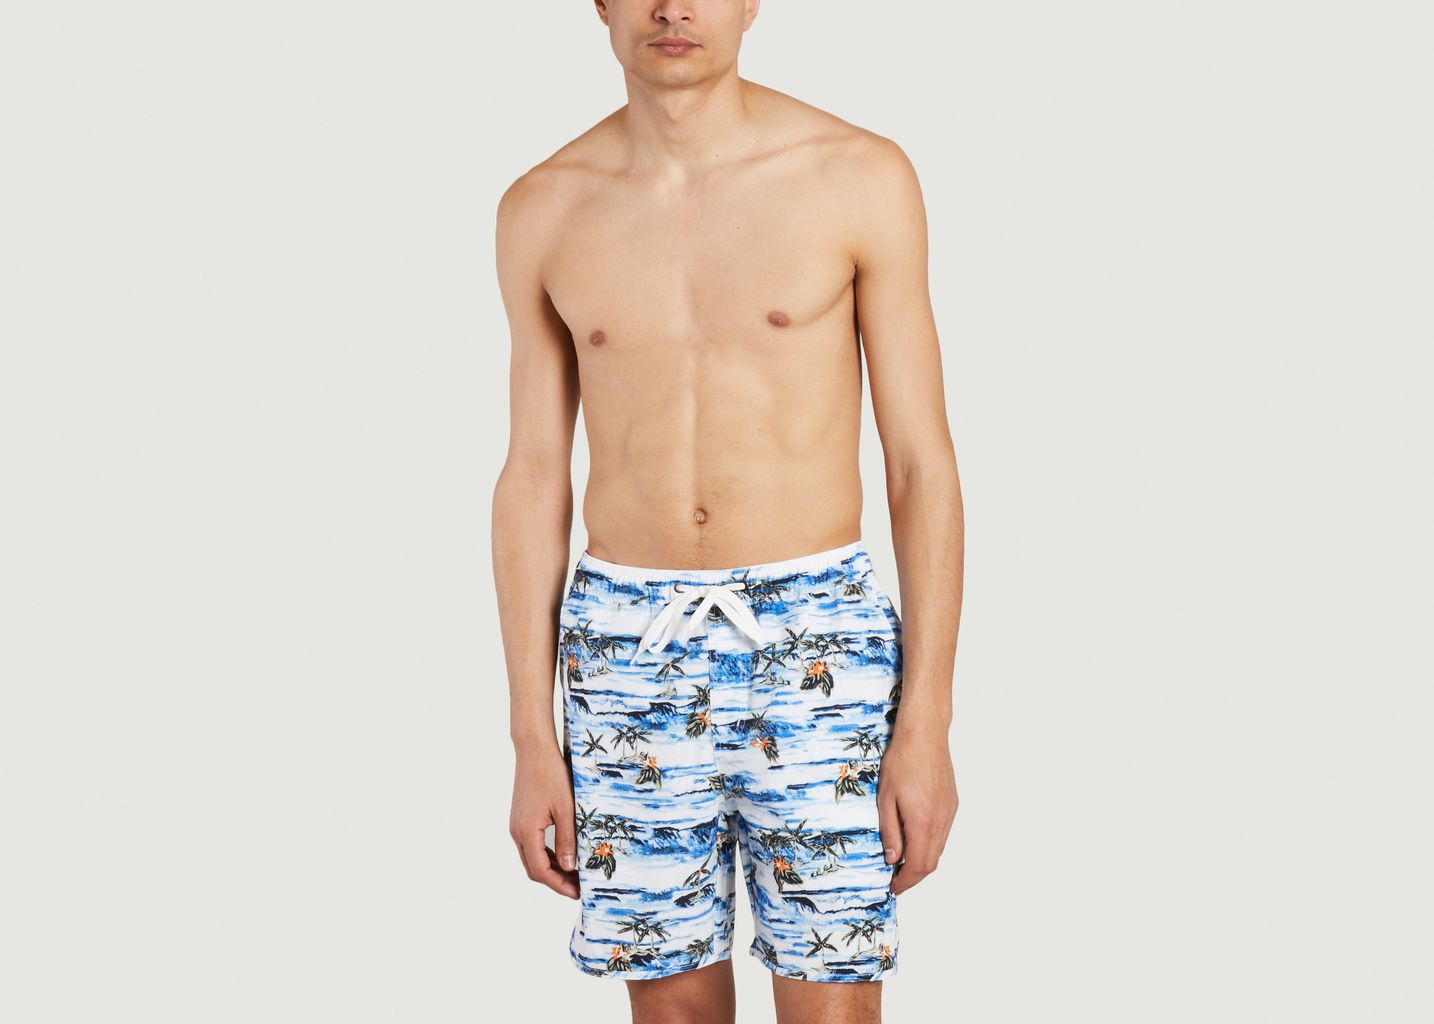 Swim shorts with waves and palm trees - KCA